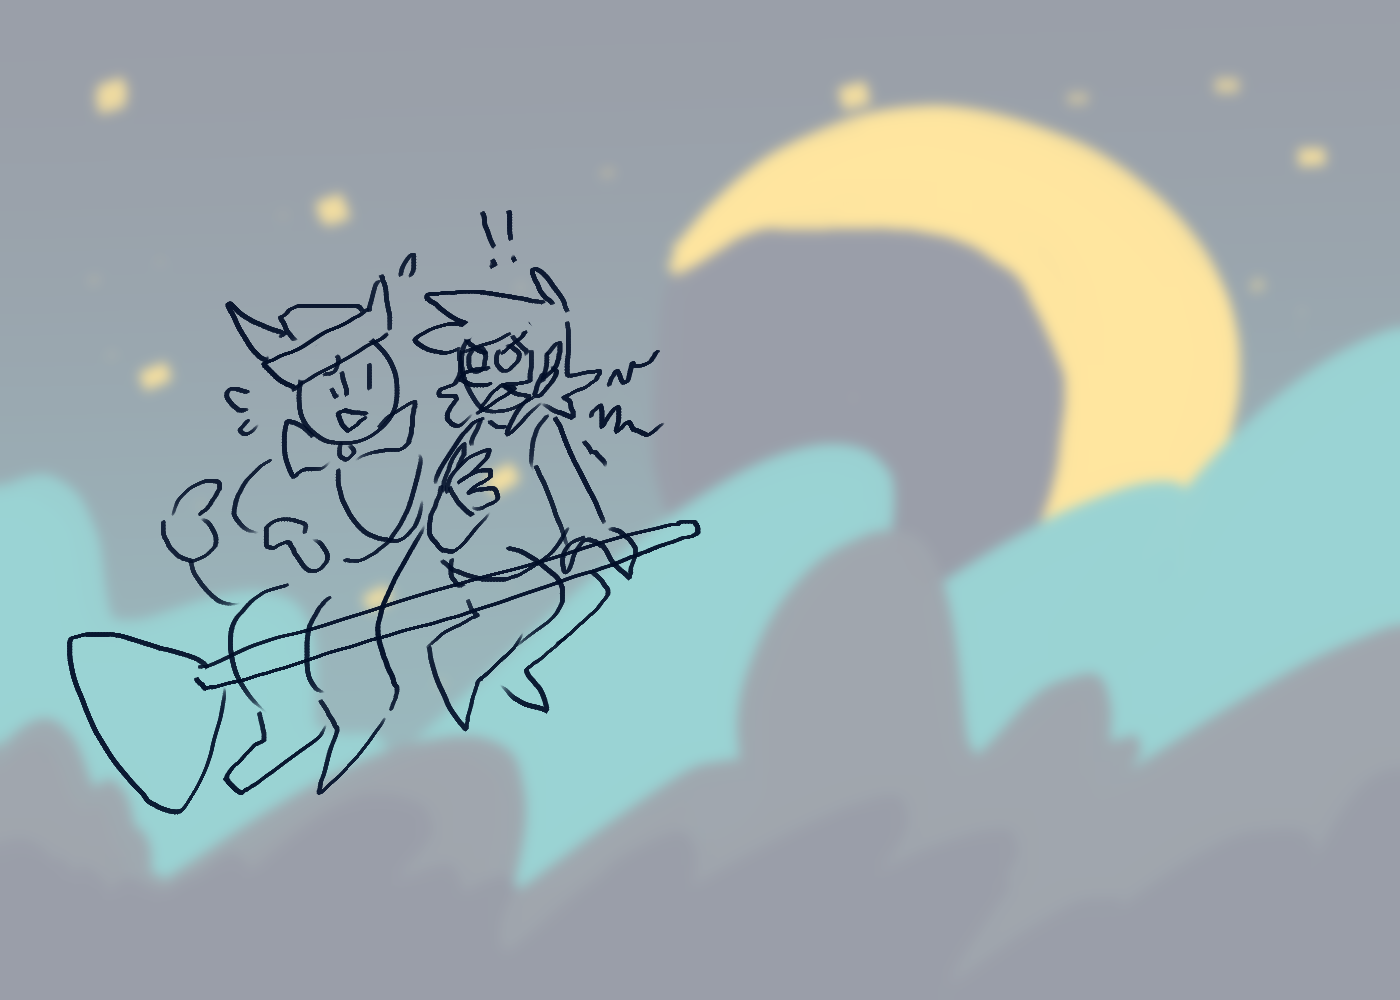 Miriam and Kiwi riding on a broom together, struggling to sign with one hunched over and the other turned around to see them.